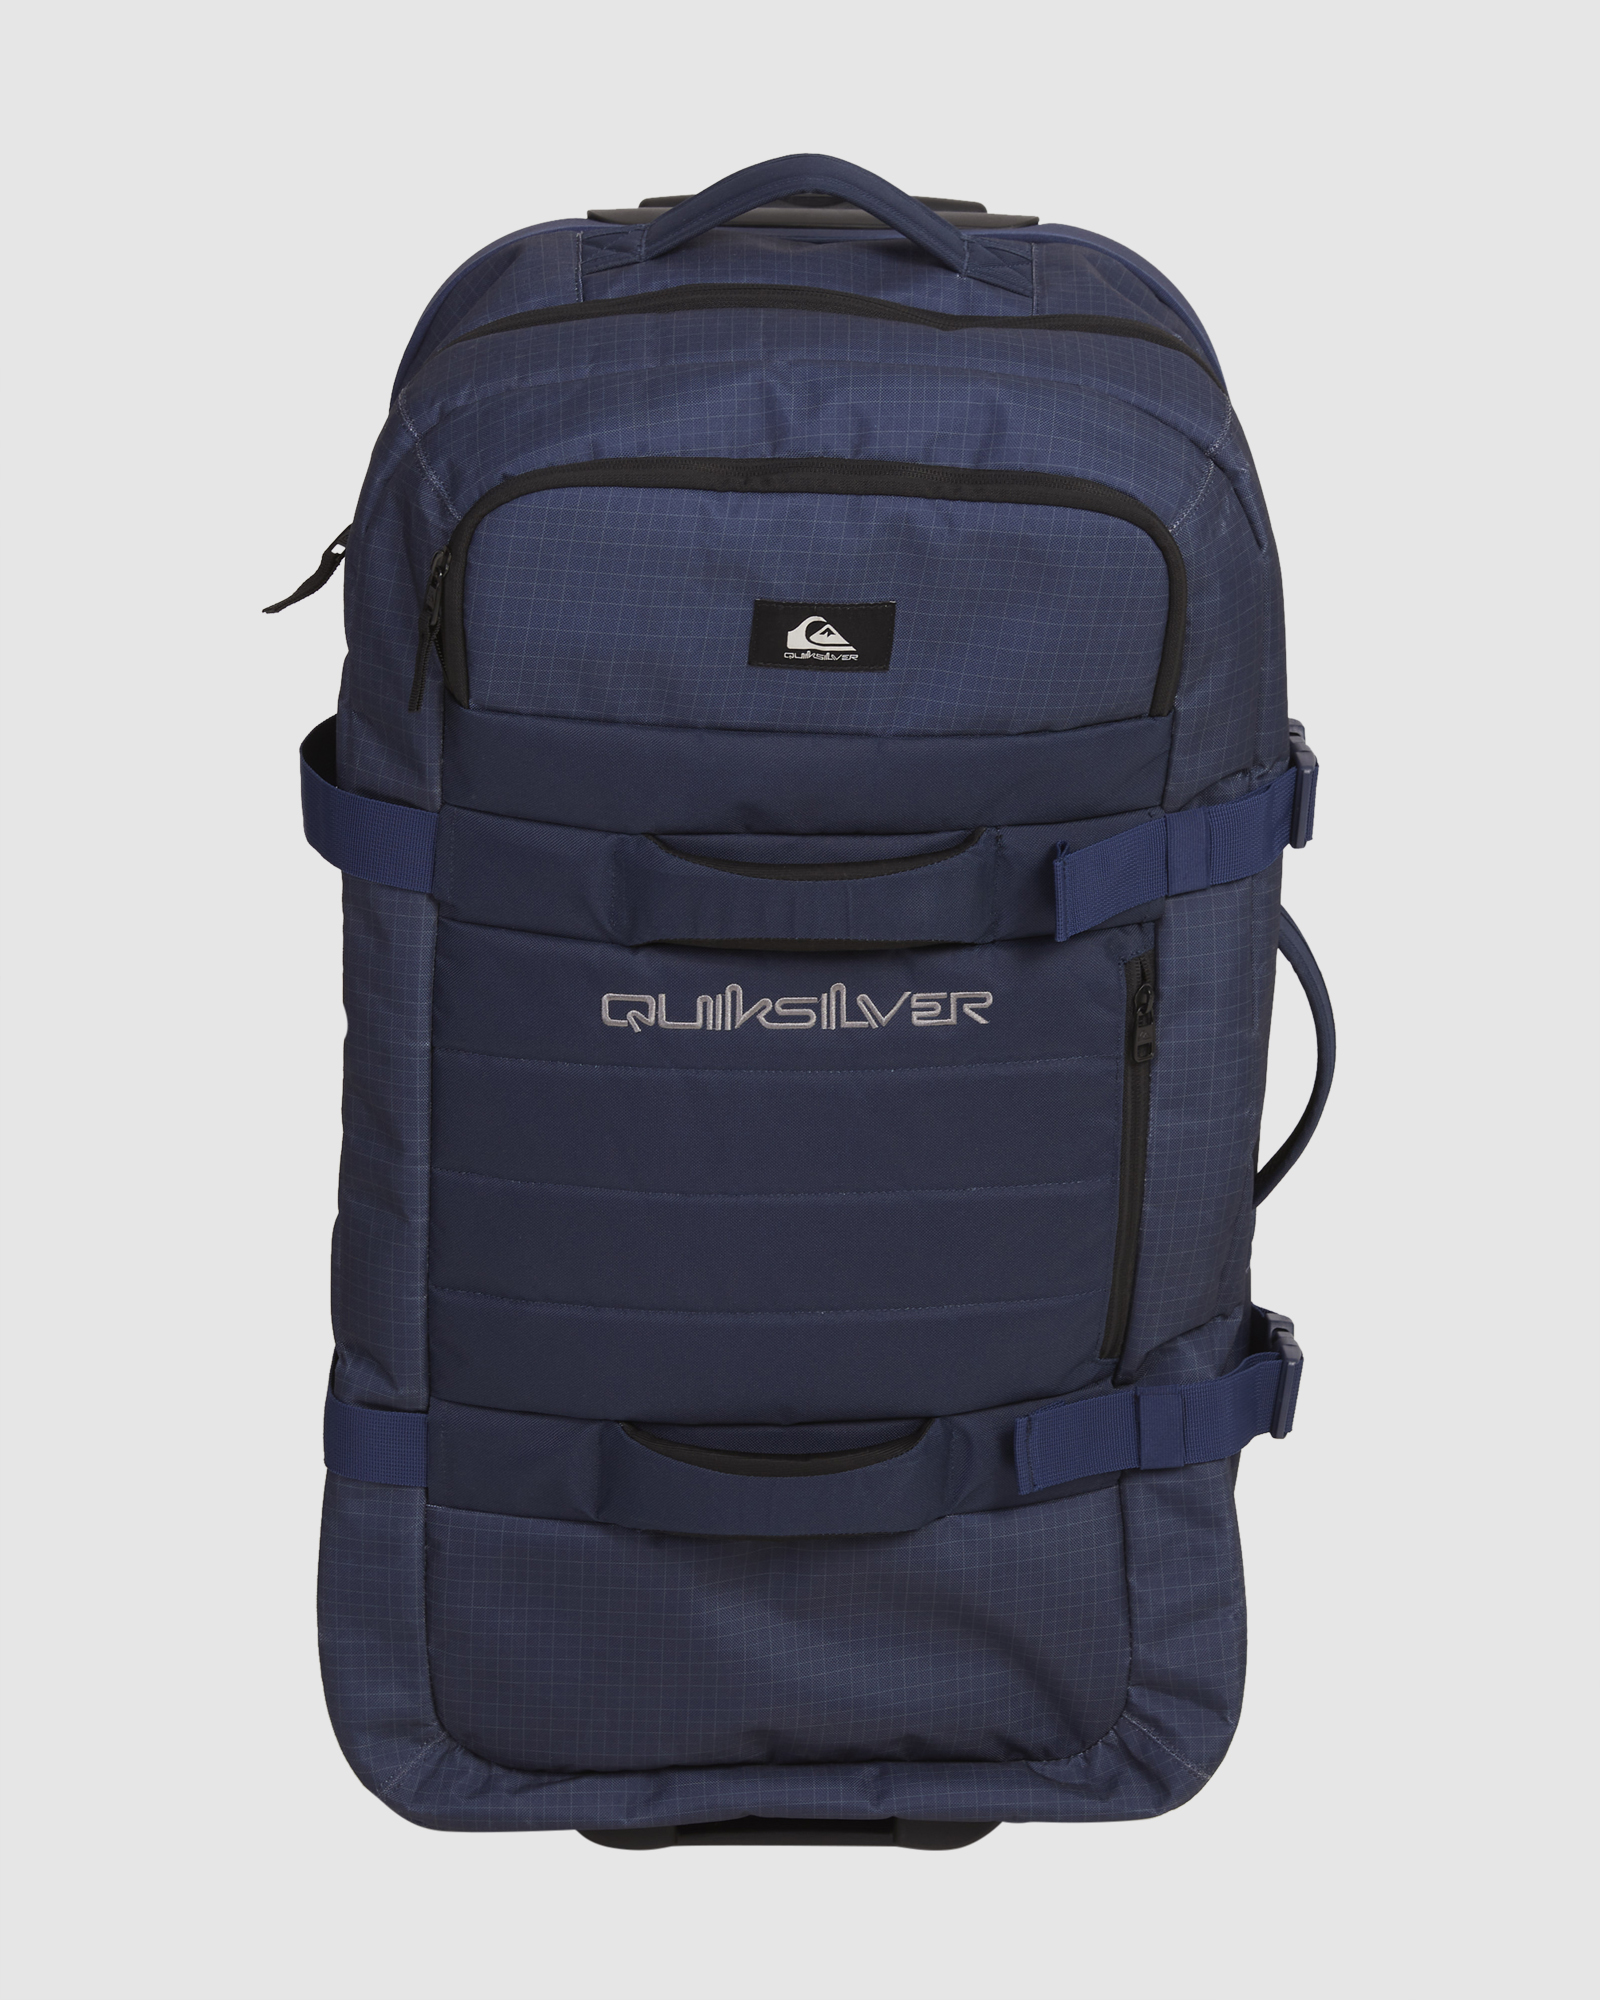 Quiksilver New Reach 100L Large Wheeled Suitcase - Naval Academy |  SurfStitch